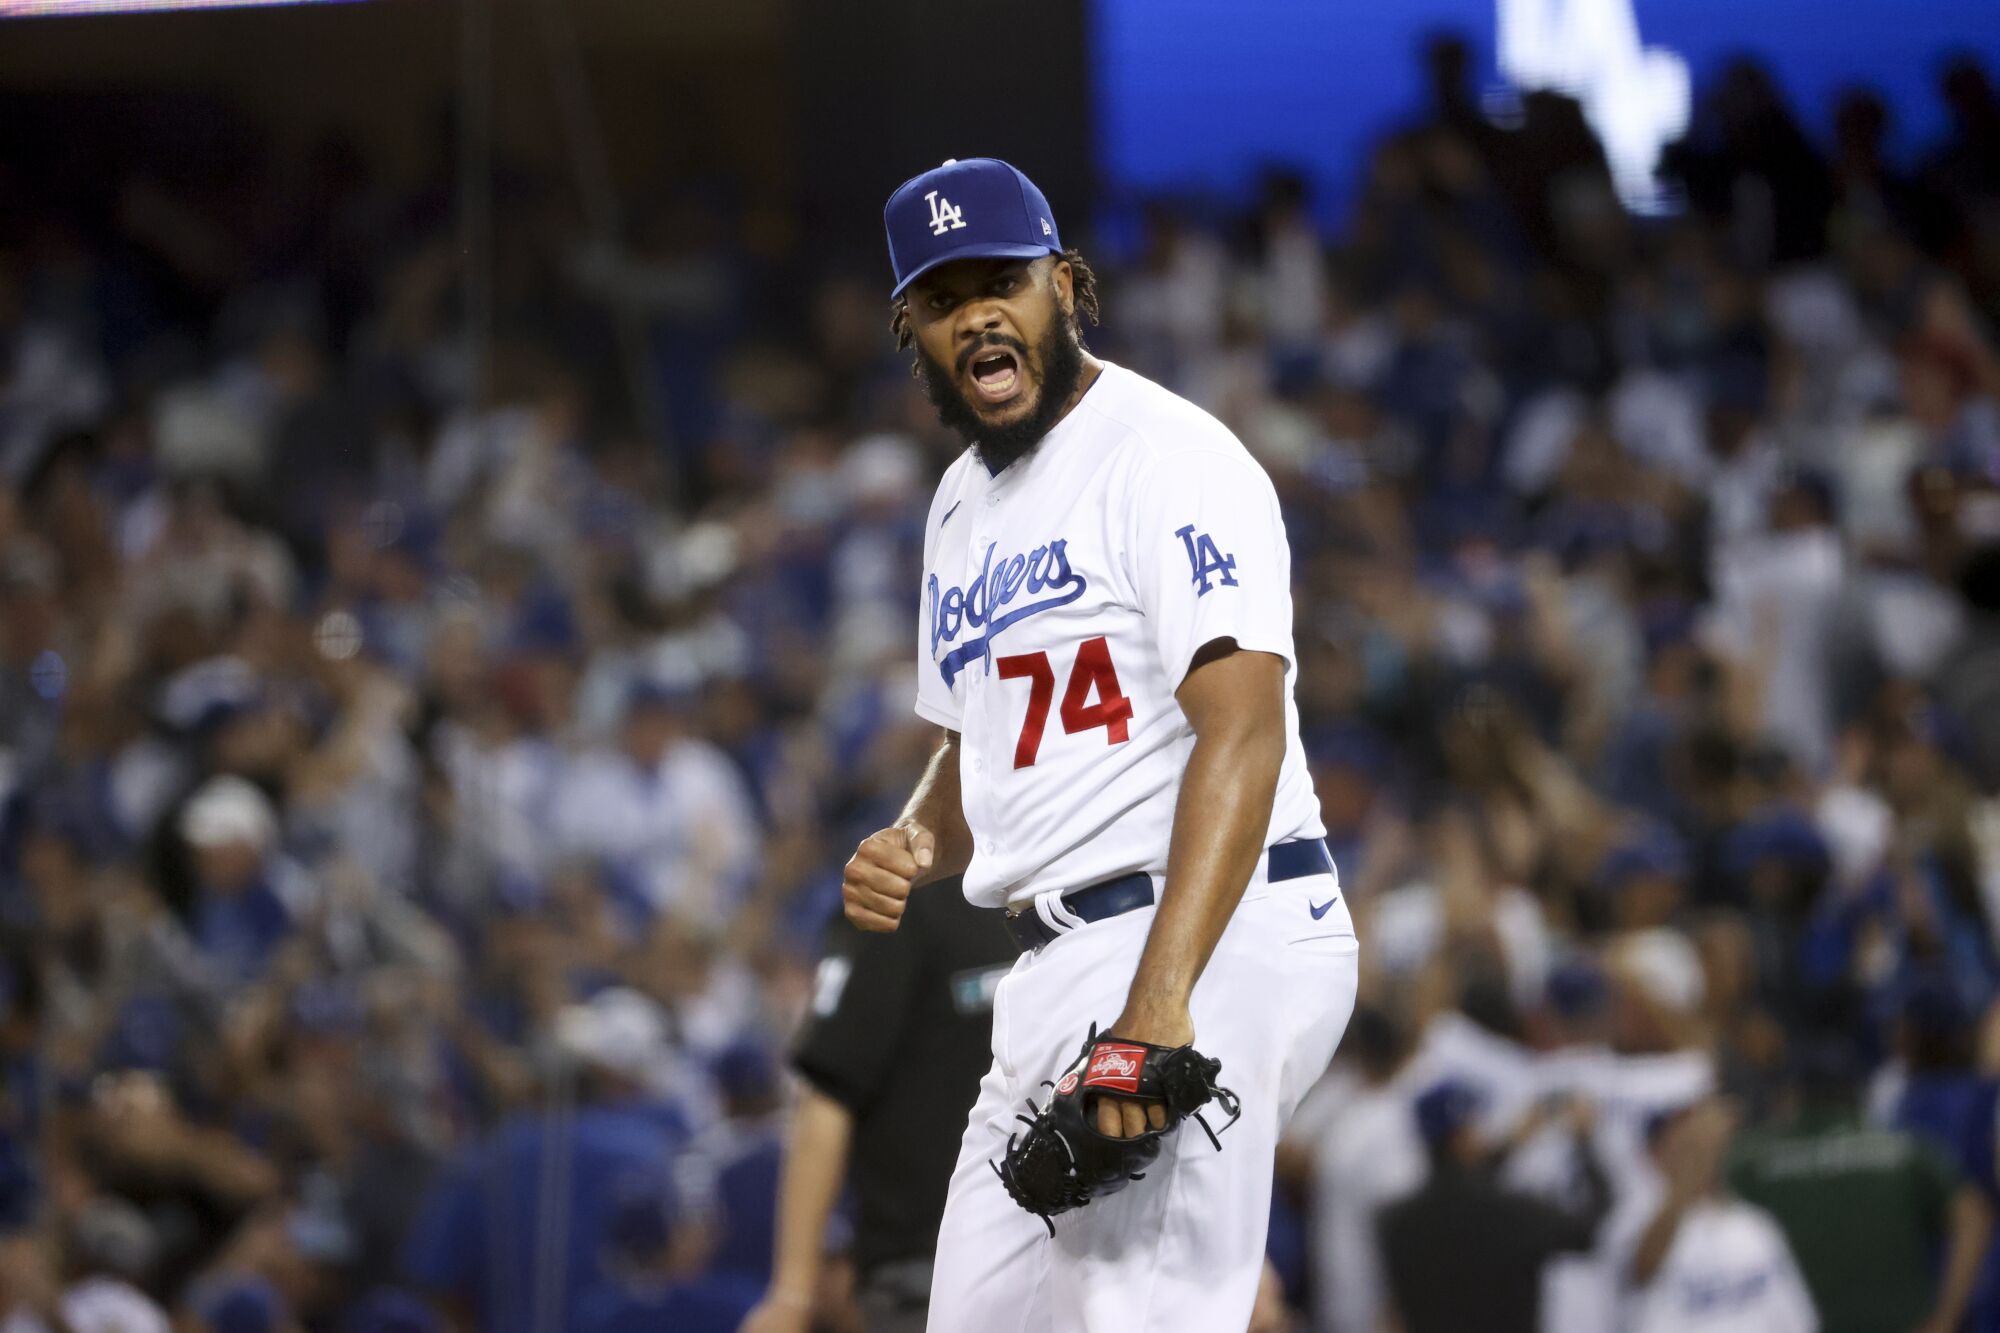 Dodgers relief pitcher Kenley Jansen celebrates on the mound during the ninth inning of a 6-5 win over the Atlanta Braves.